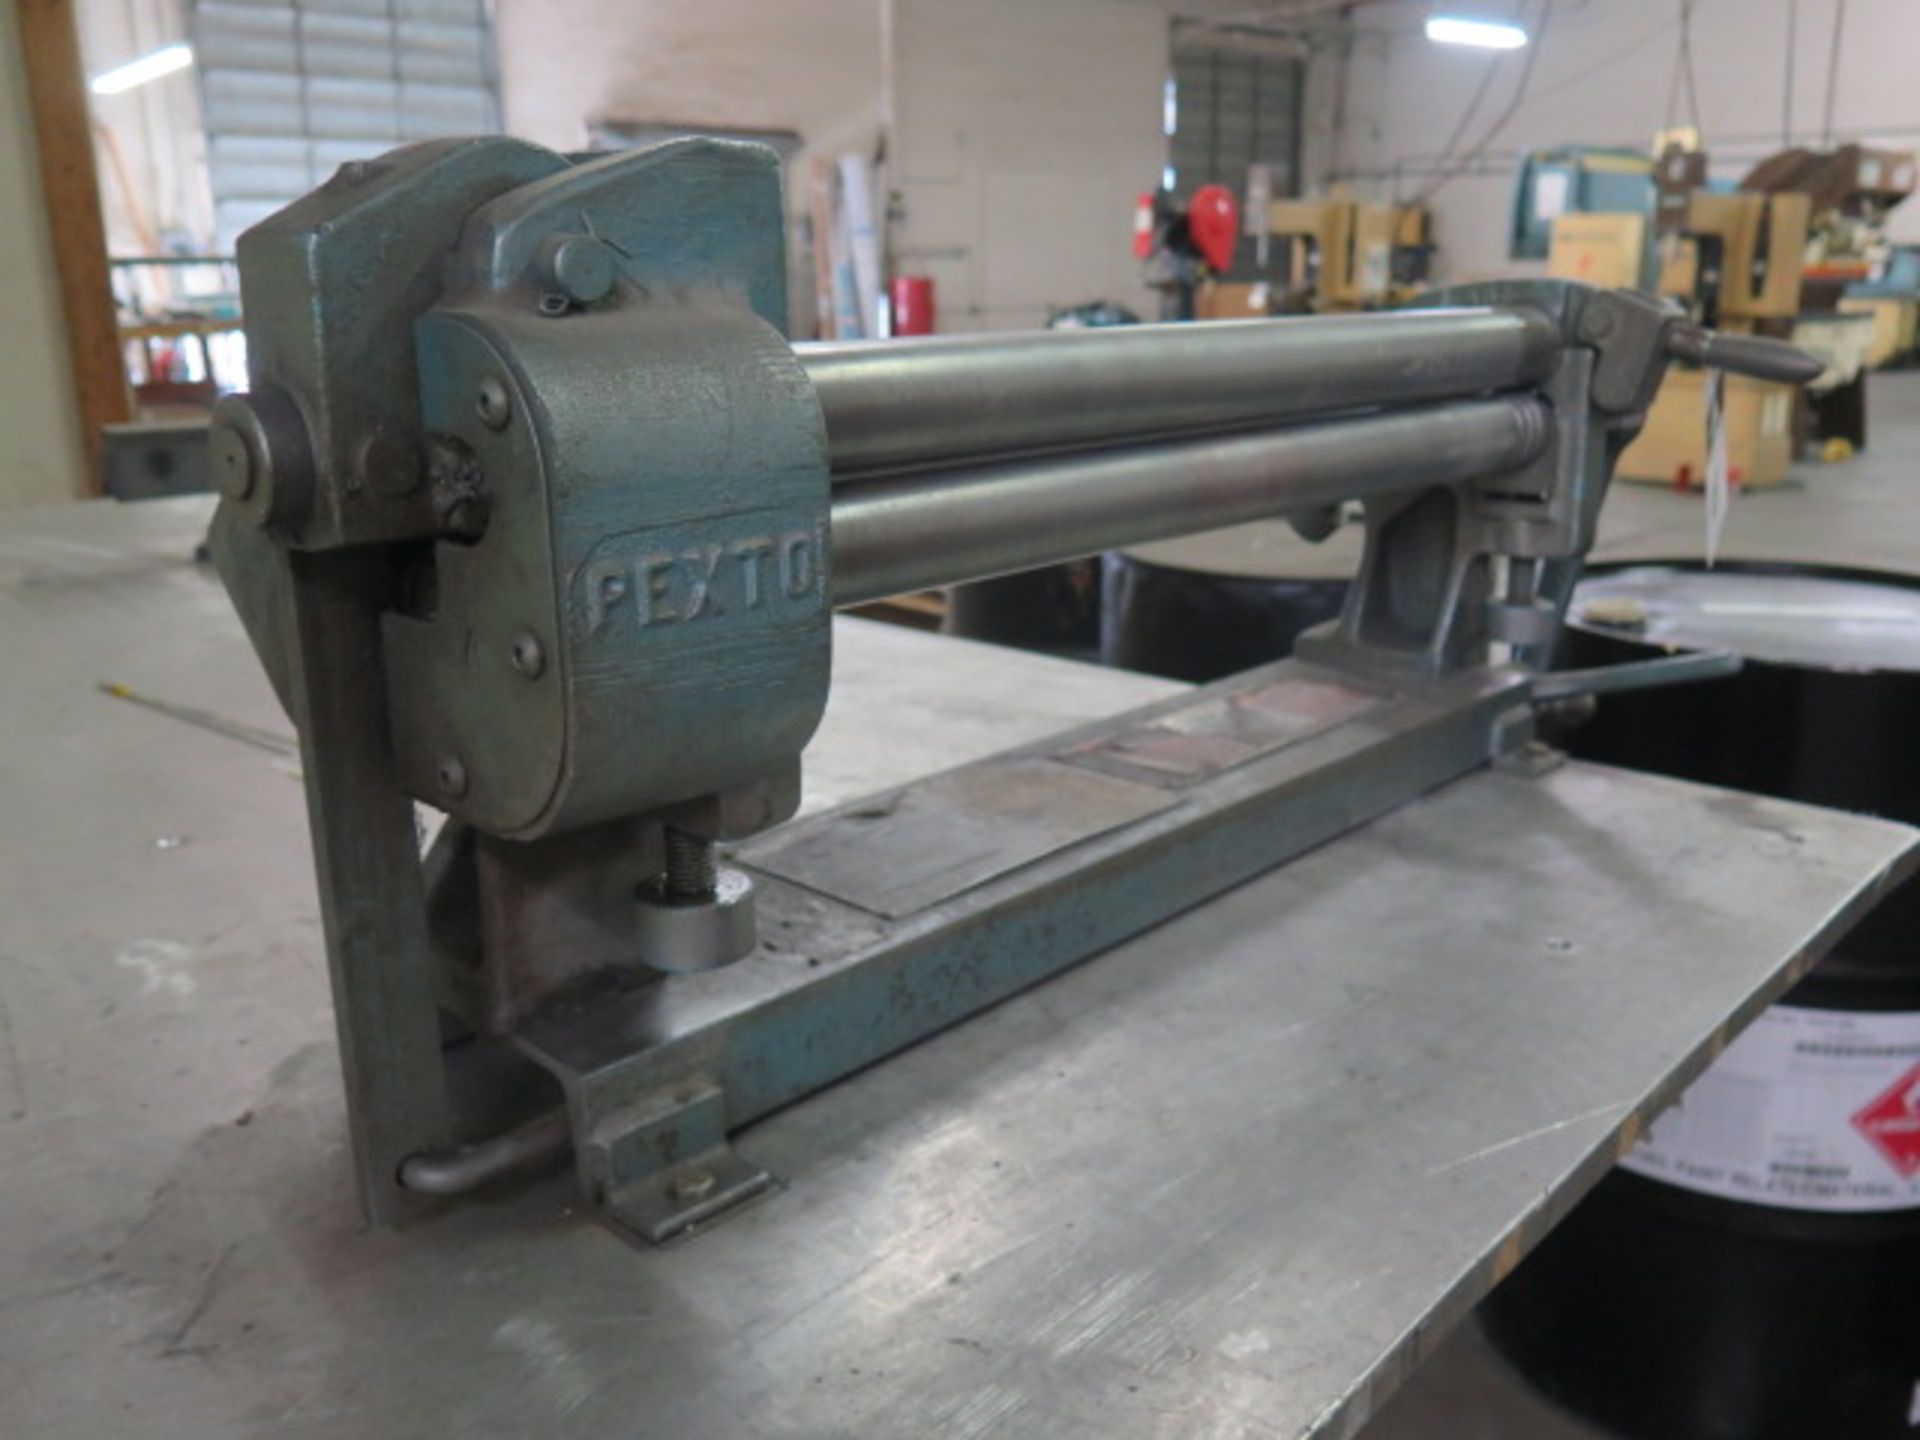 Pexto mdl. 383D 36" Hand Roll w/ 2" Rolls, Eron 6" Bench Vise w/ 48" x 80" x 3/4" Table, SOLD AS IS - Image 2 of 9